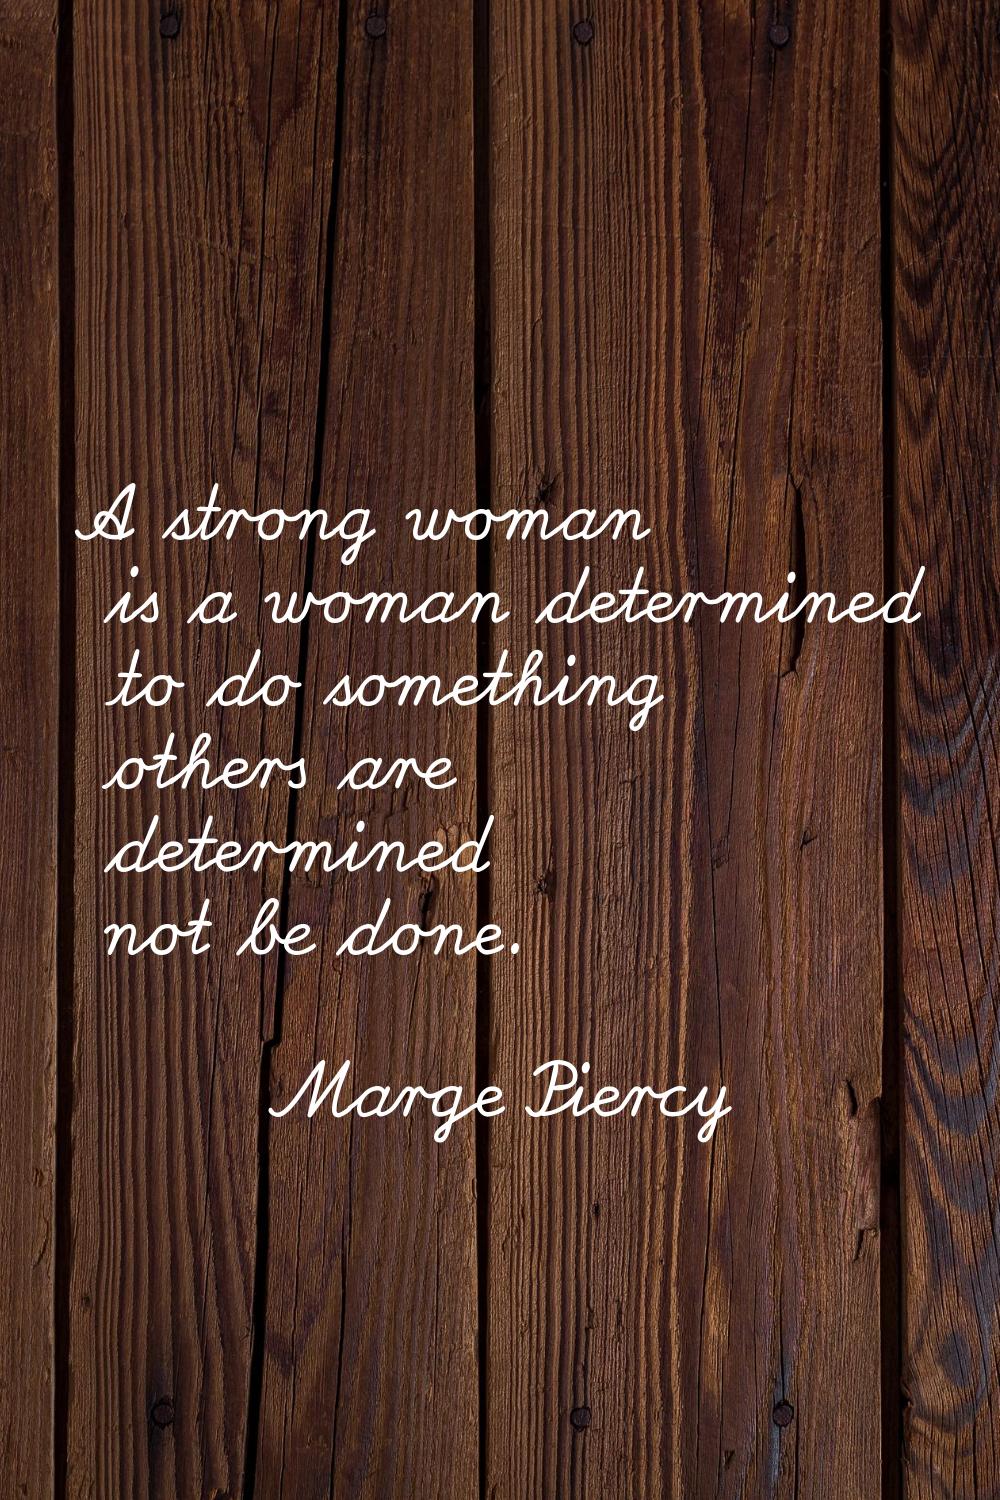 A strong woman is a woman determined to do something others are determined not be done.